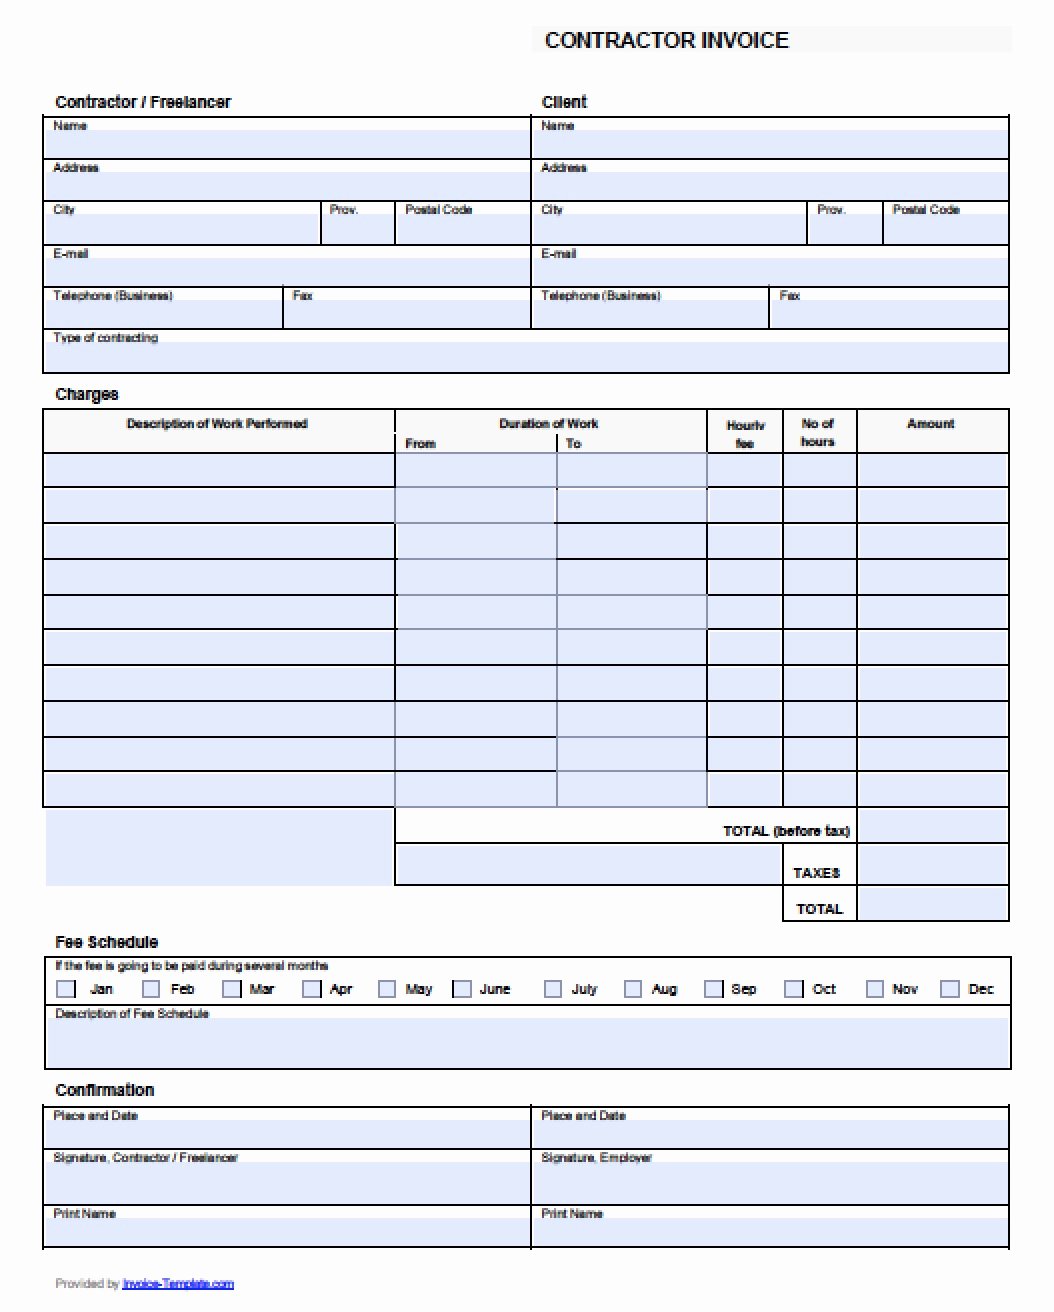 Independent Contractor Invoice Template Excel Lovely Independent Contractor Invoice Template Excel